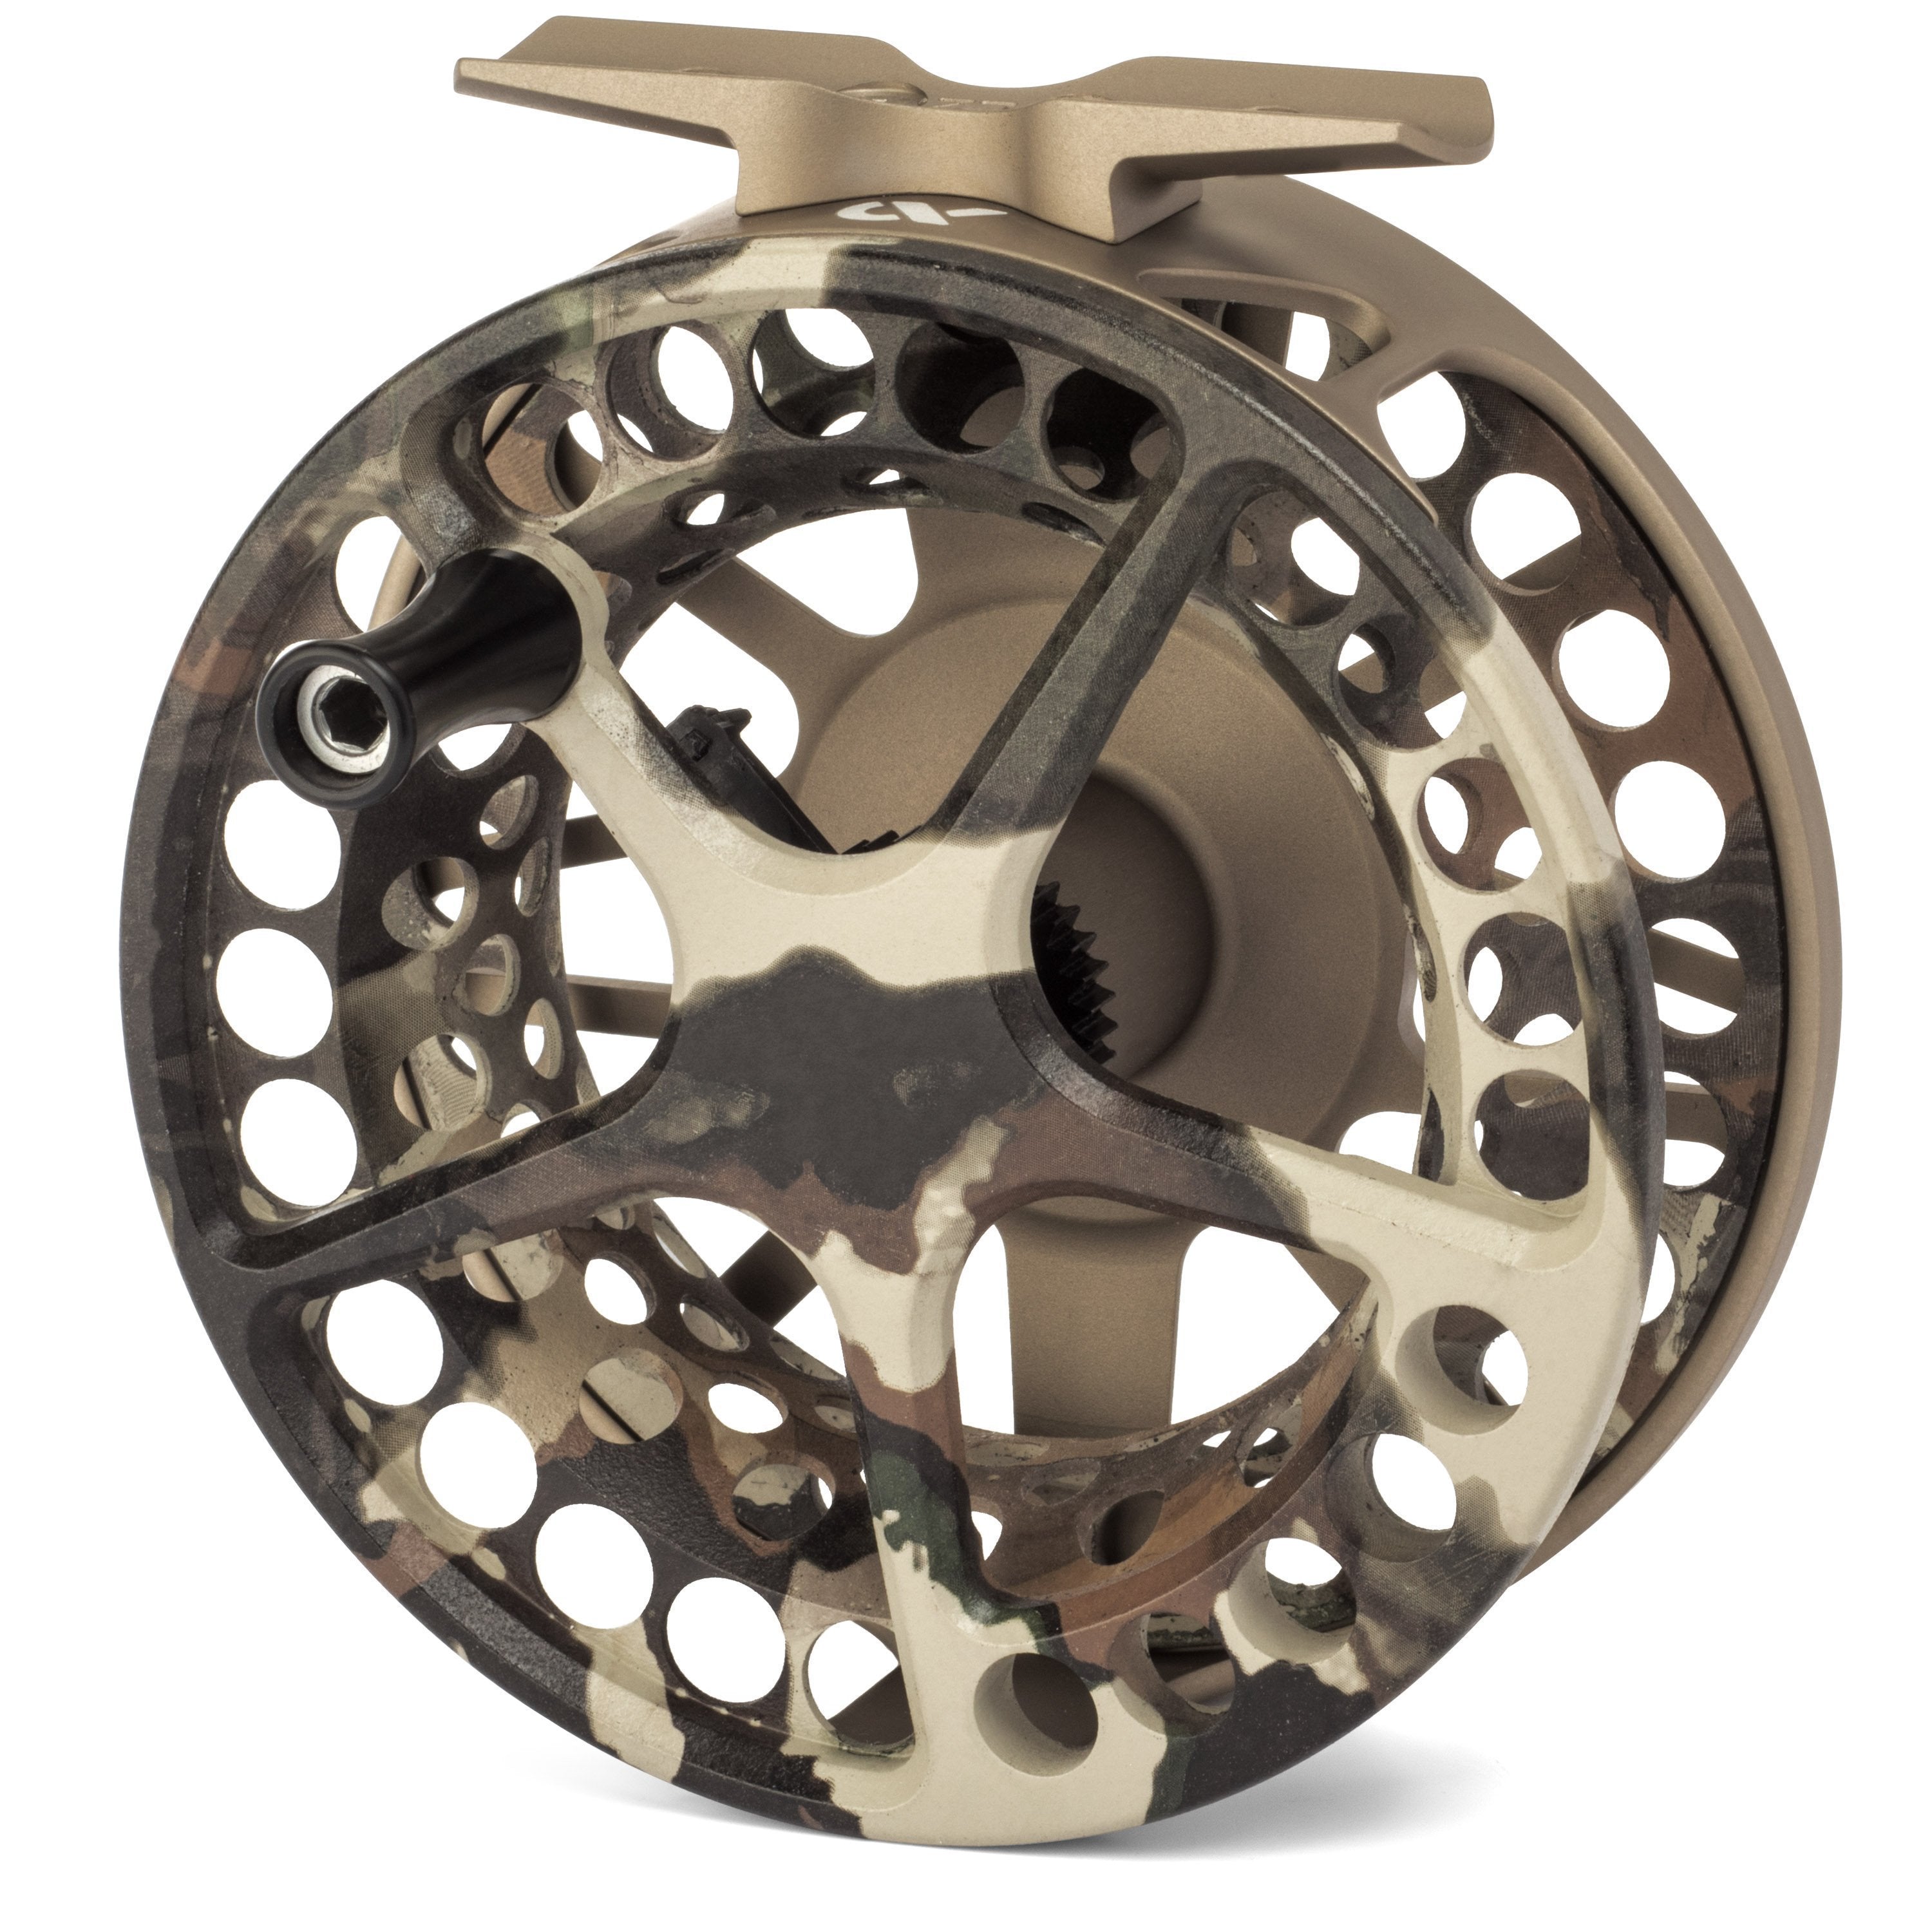 Lamson Litespeed IV #2 Fly Reel Review - Trident Fly Fishing